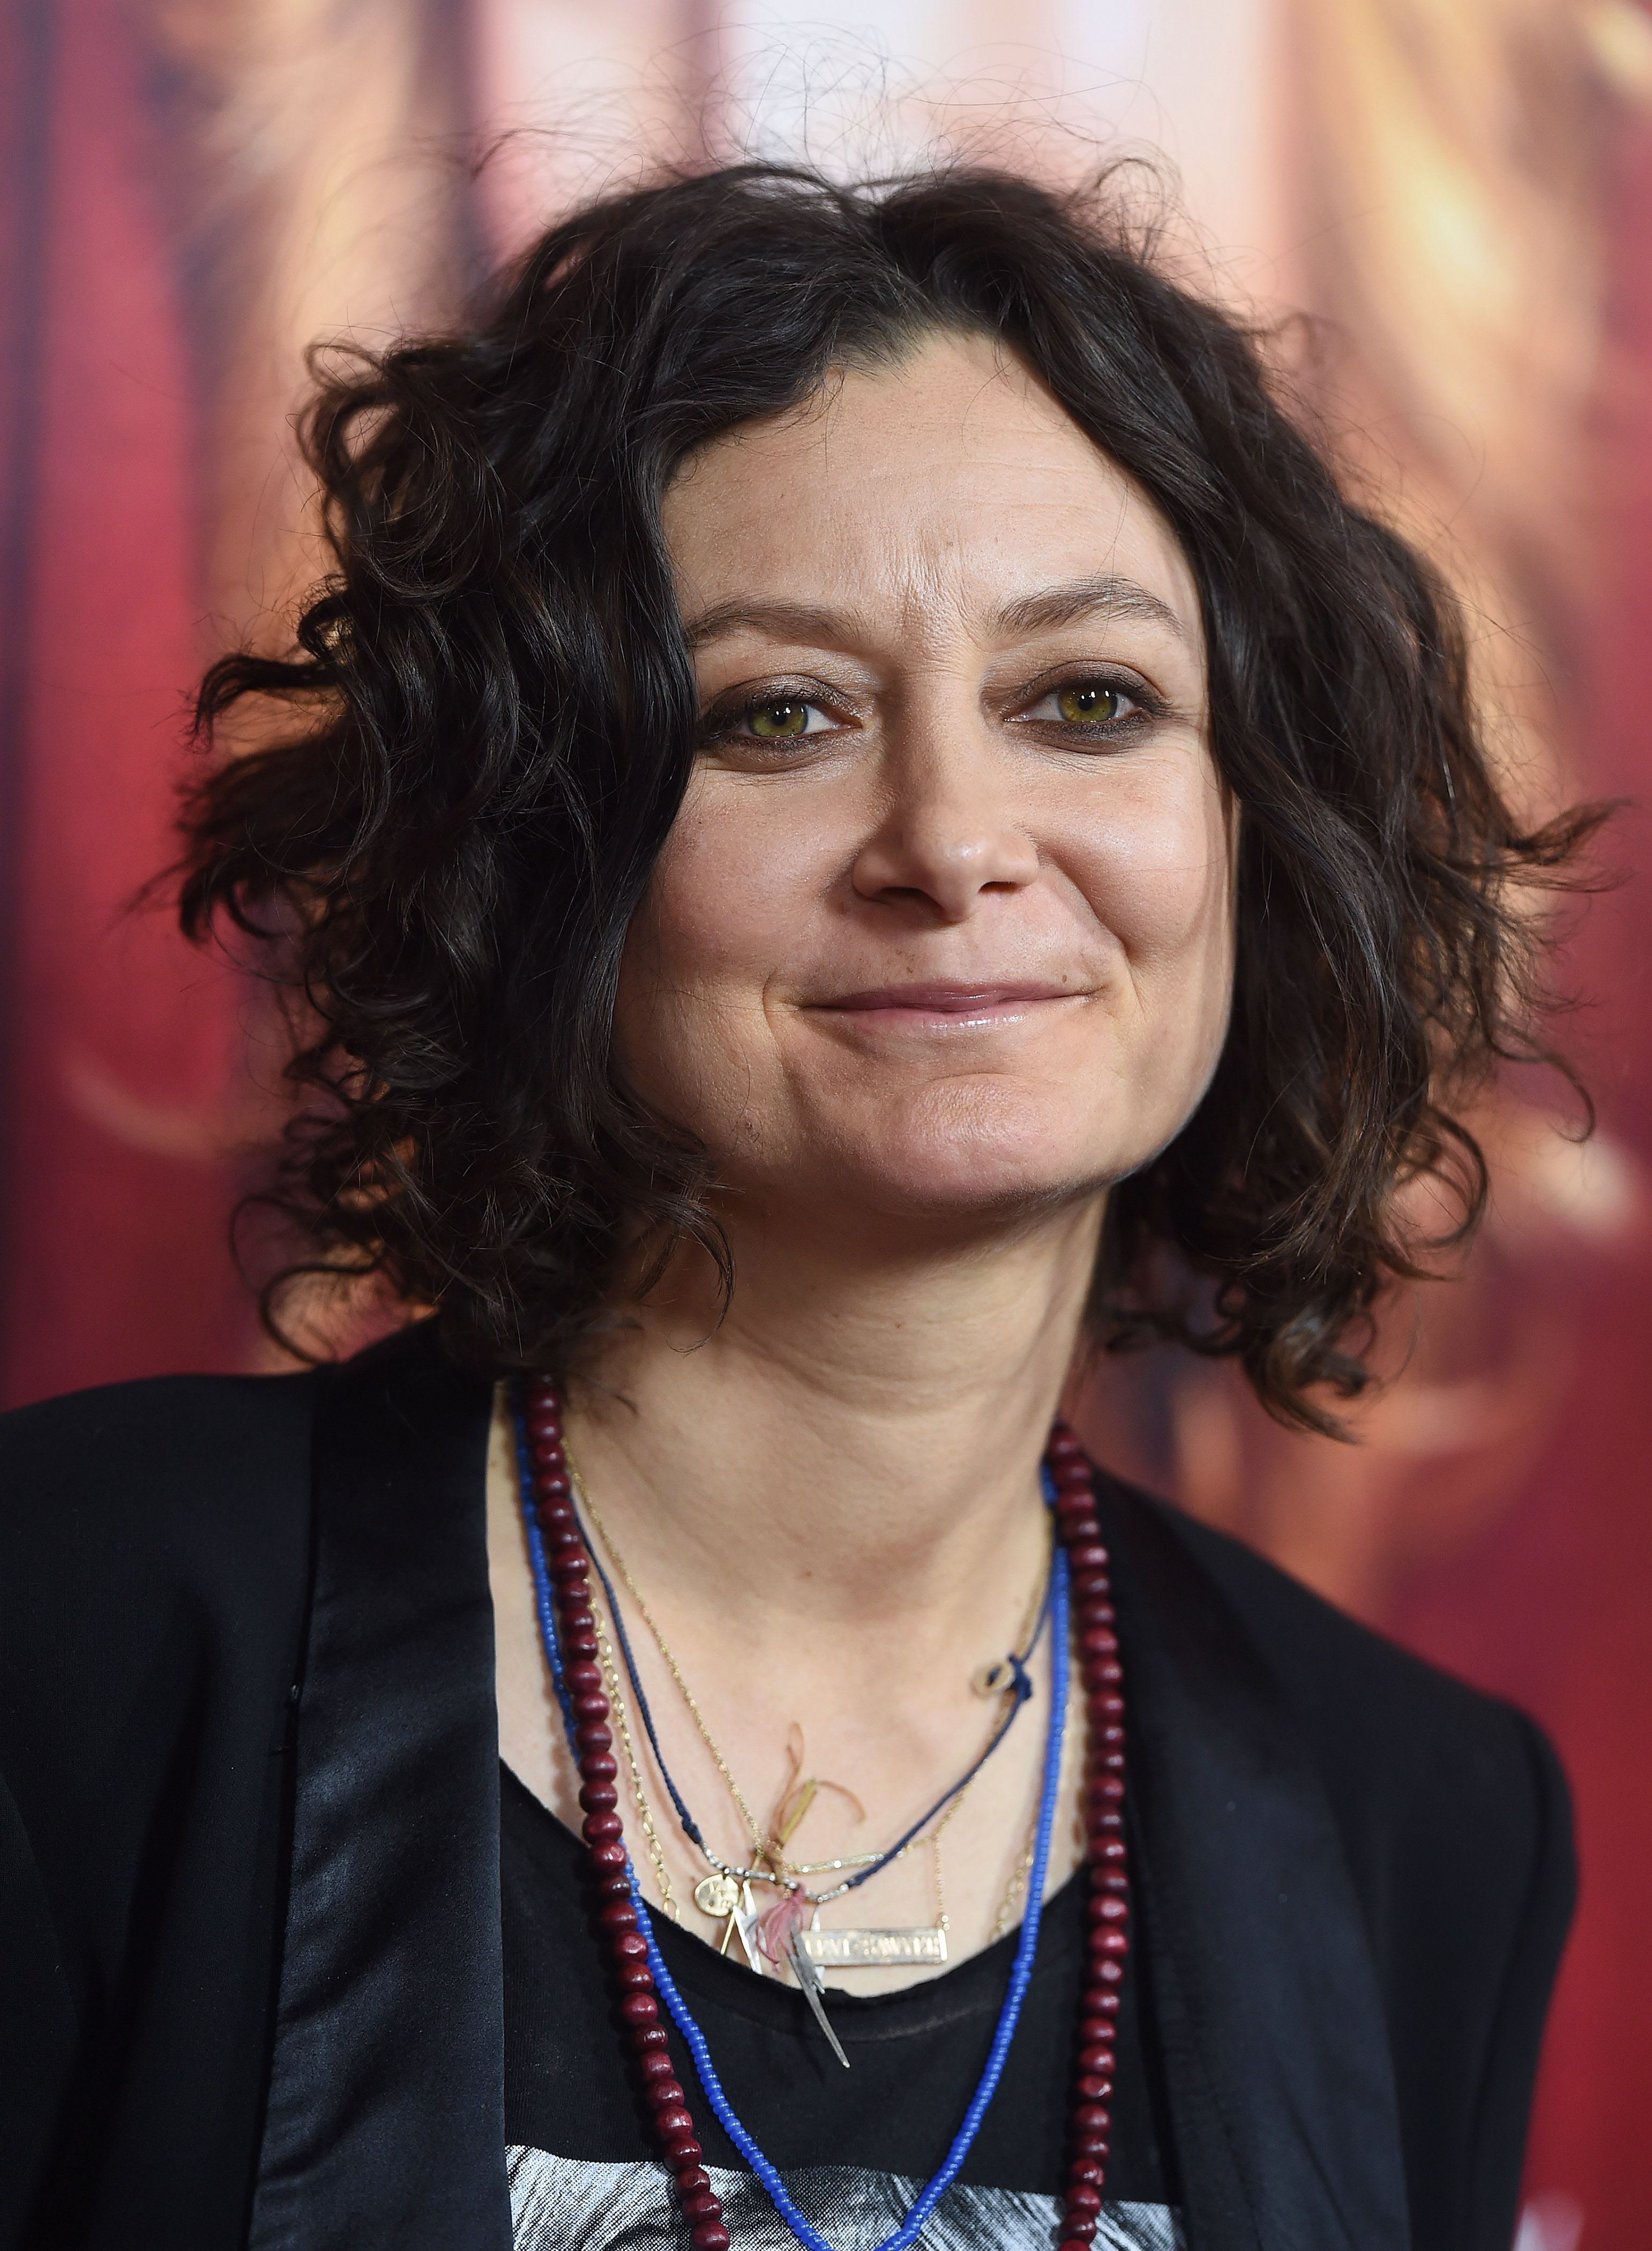 Sara Gilbert arrives at the season premiere of HBO's "The Comeback" at the El Capitan Theatre on November 5, 2014, in Hollywood, California. | Source: Getty Images